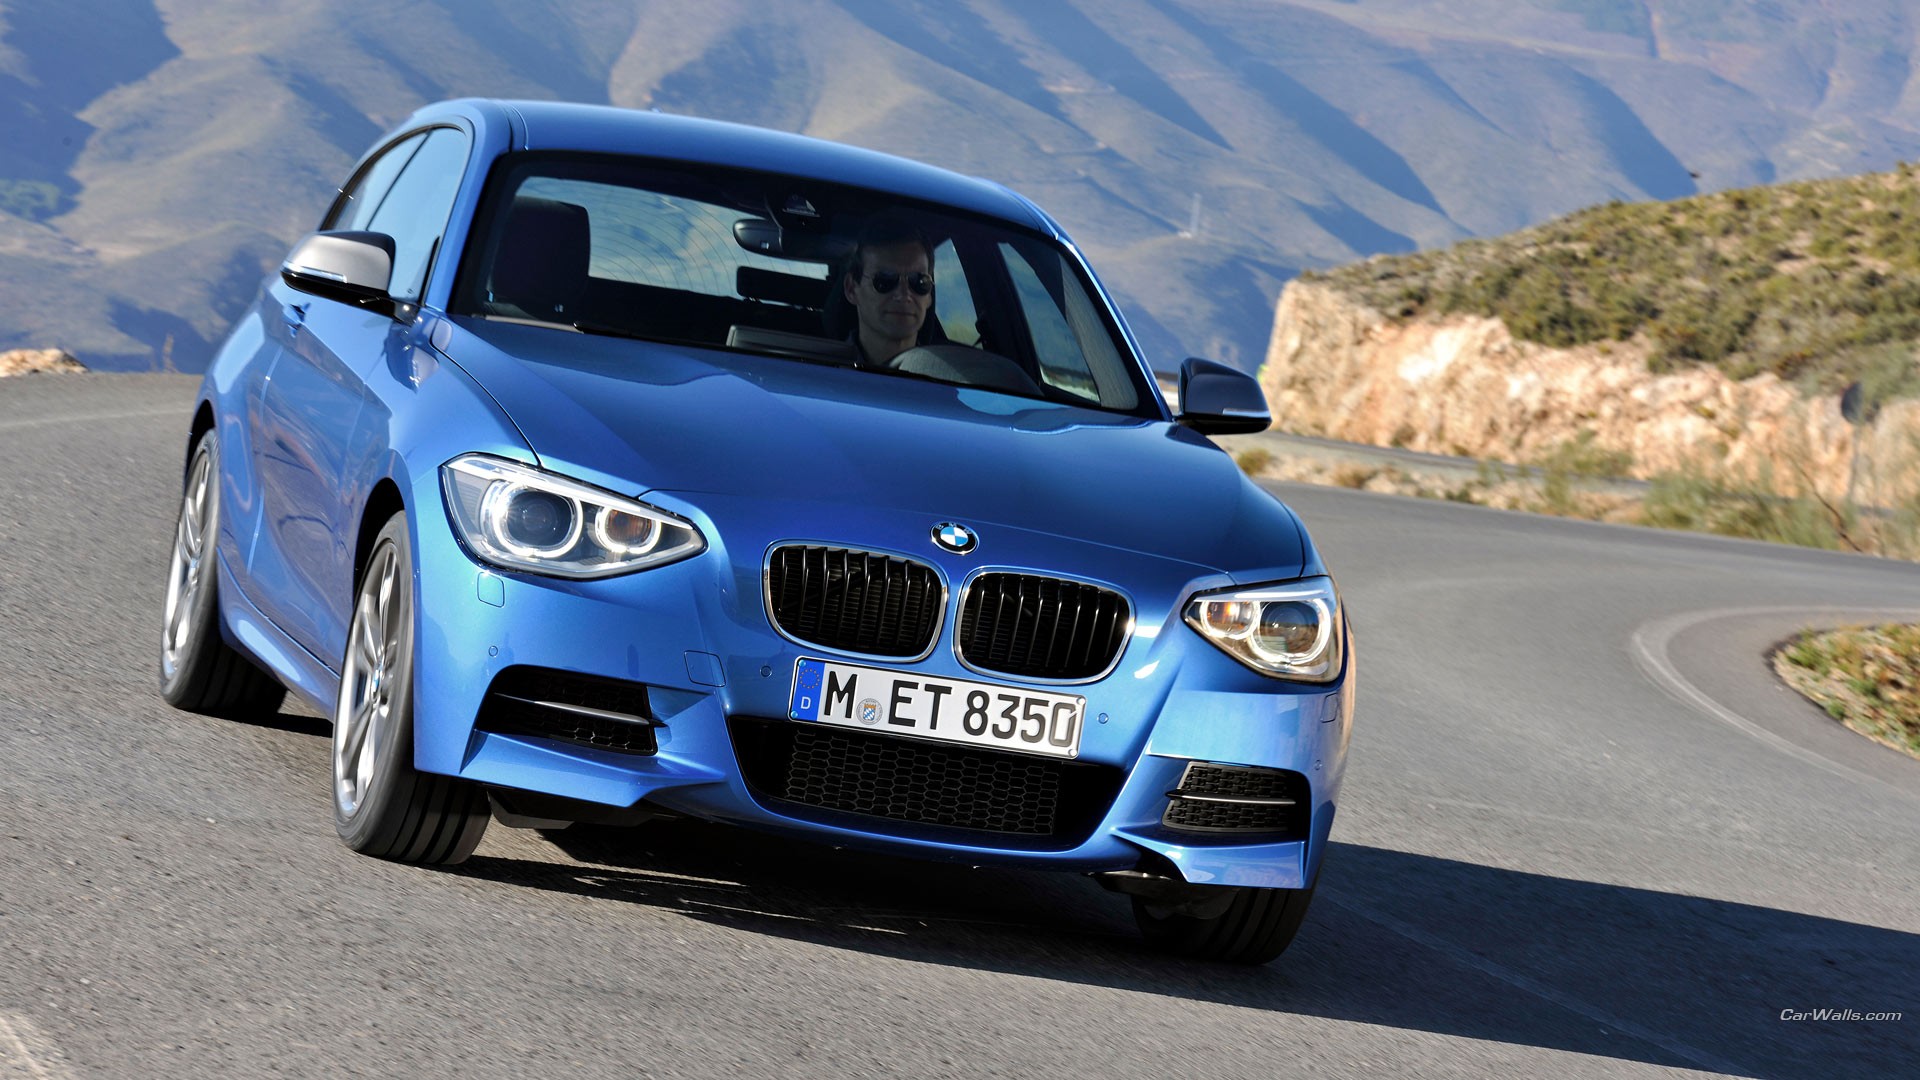  BMW  1M  Wallpapers  HD Desktop and Mobile Backgrounds